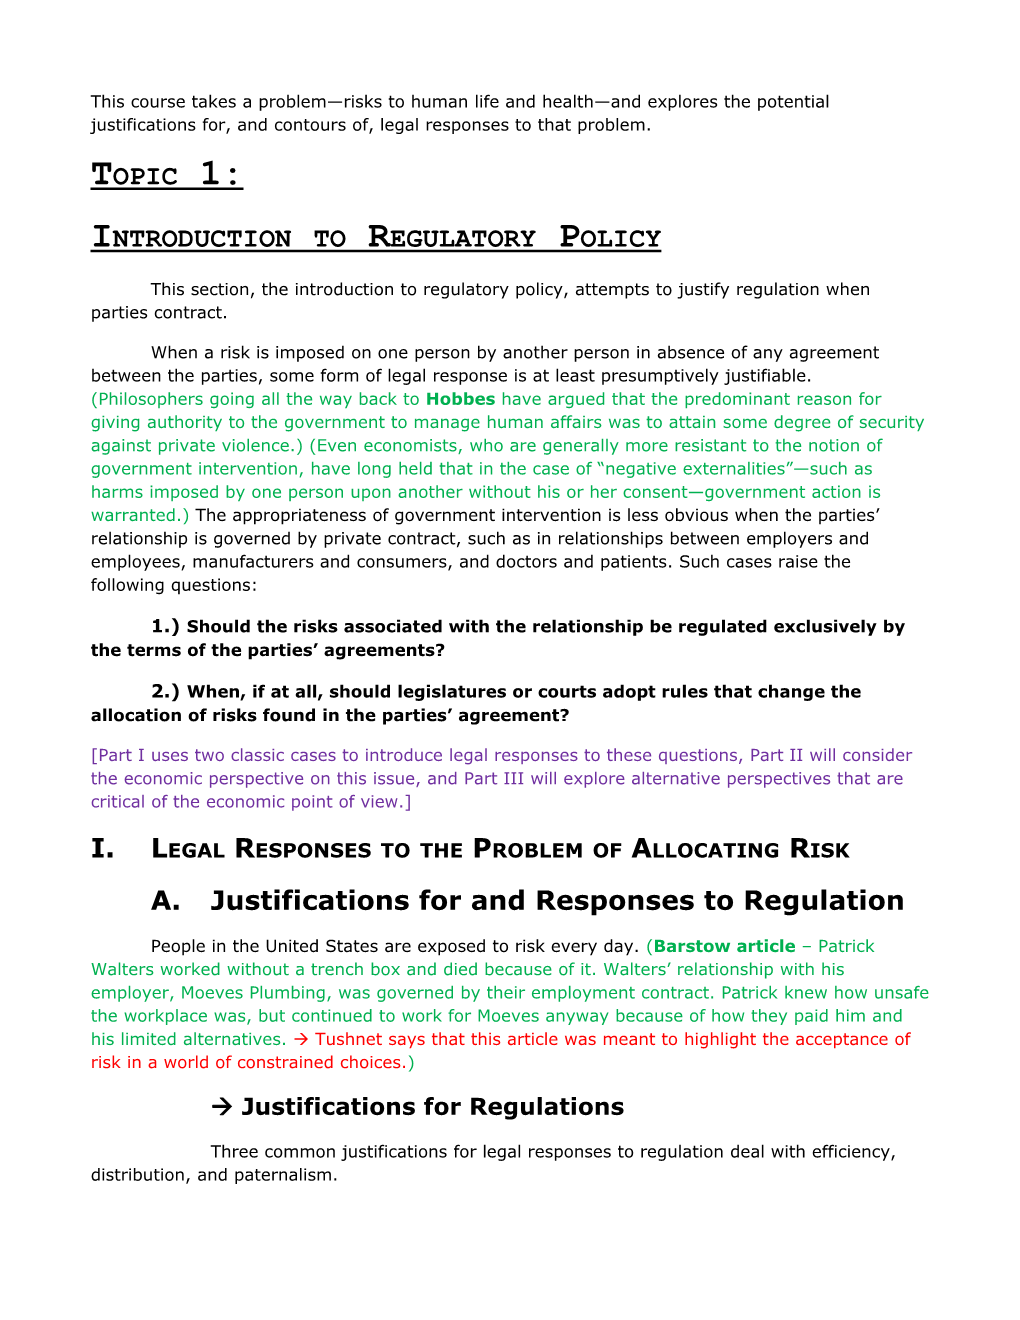 Introduction to Regulatory Policy